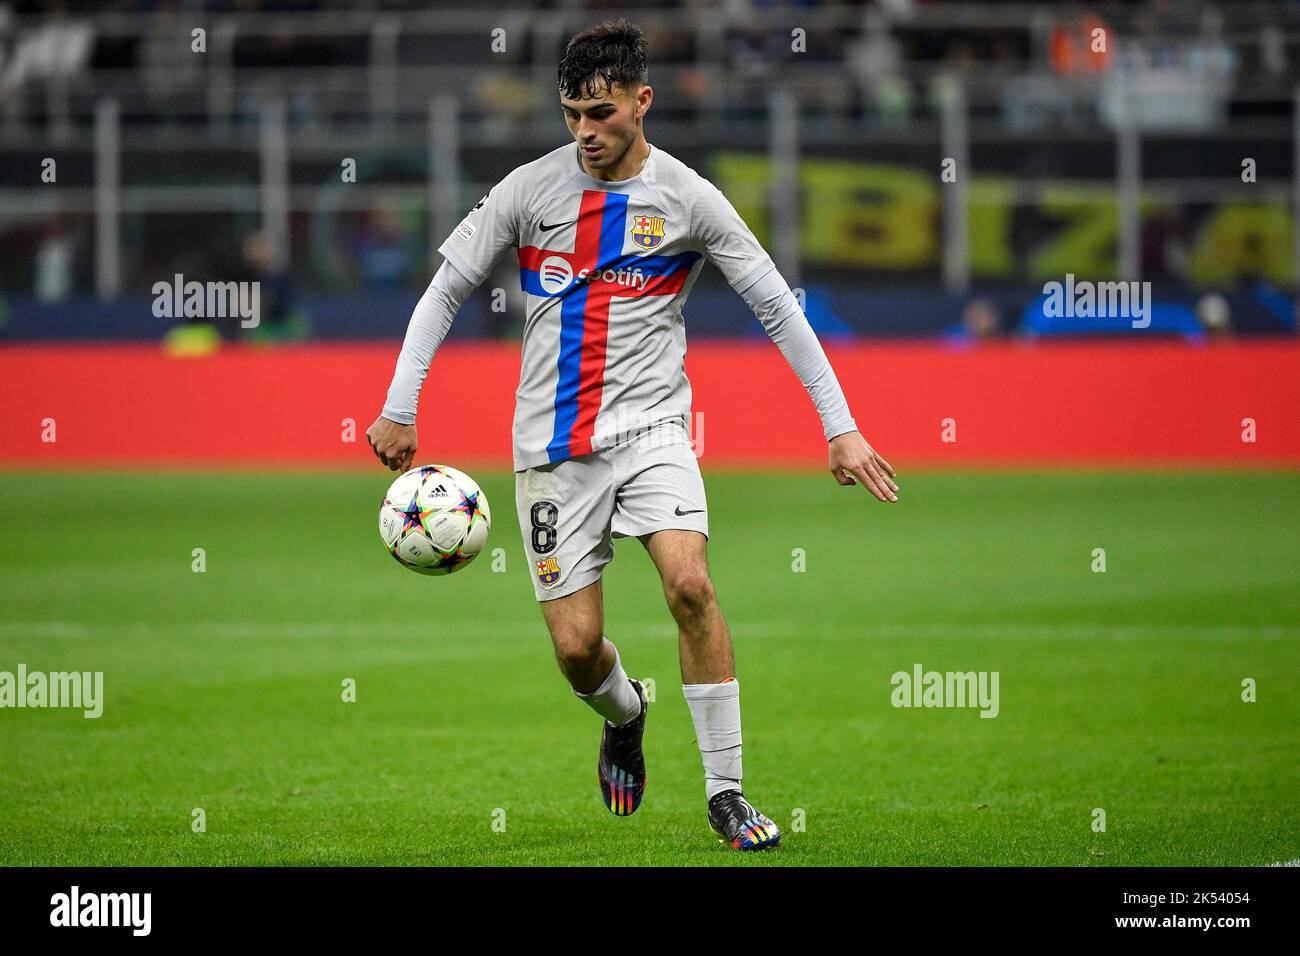 Pedro Gonzalez Lopez aka Pedri of Barcelona in action during the Champions League Group C football match between FC Internazionale and FCB Barcelona a Stock Photo